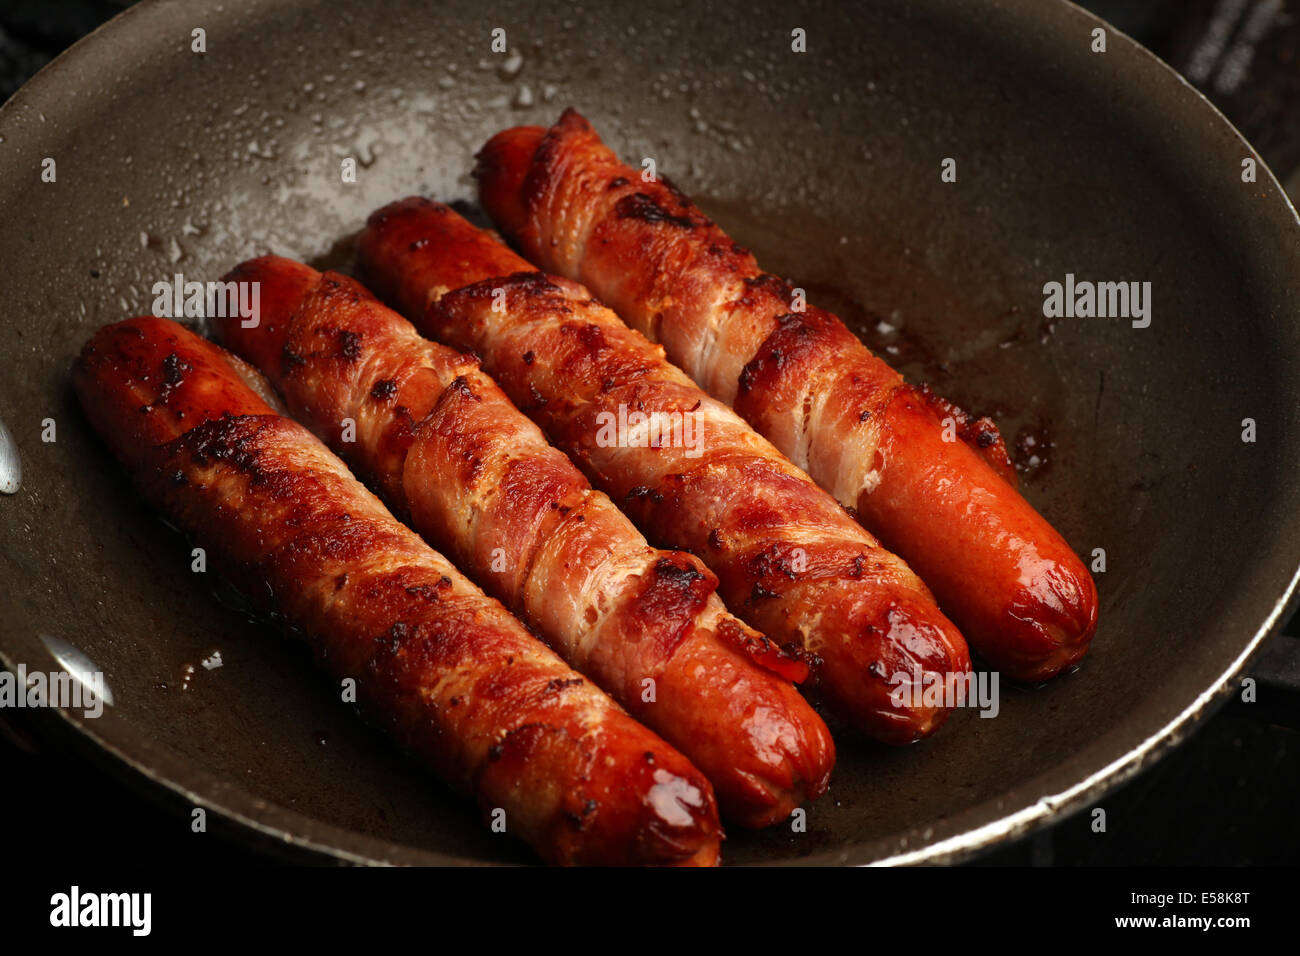 View of hot dogs wrapped in bacon in fry pan Stock Photo